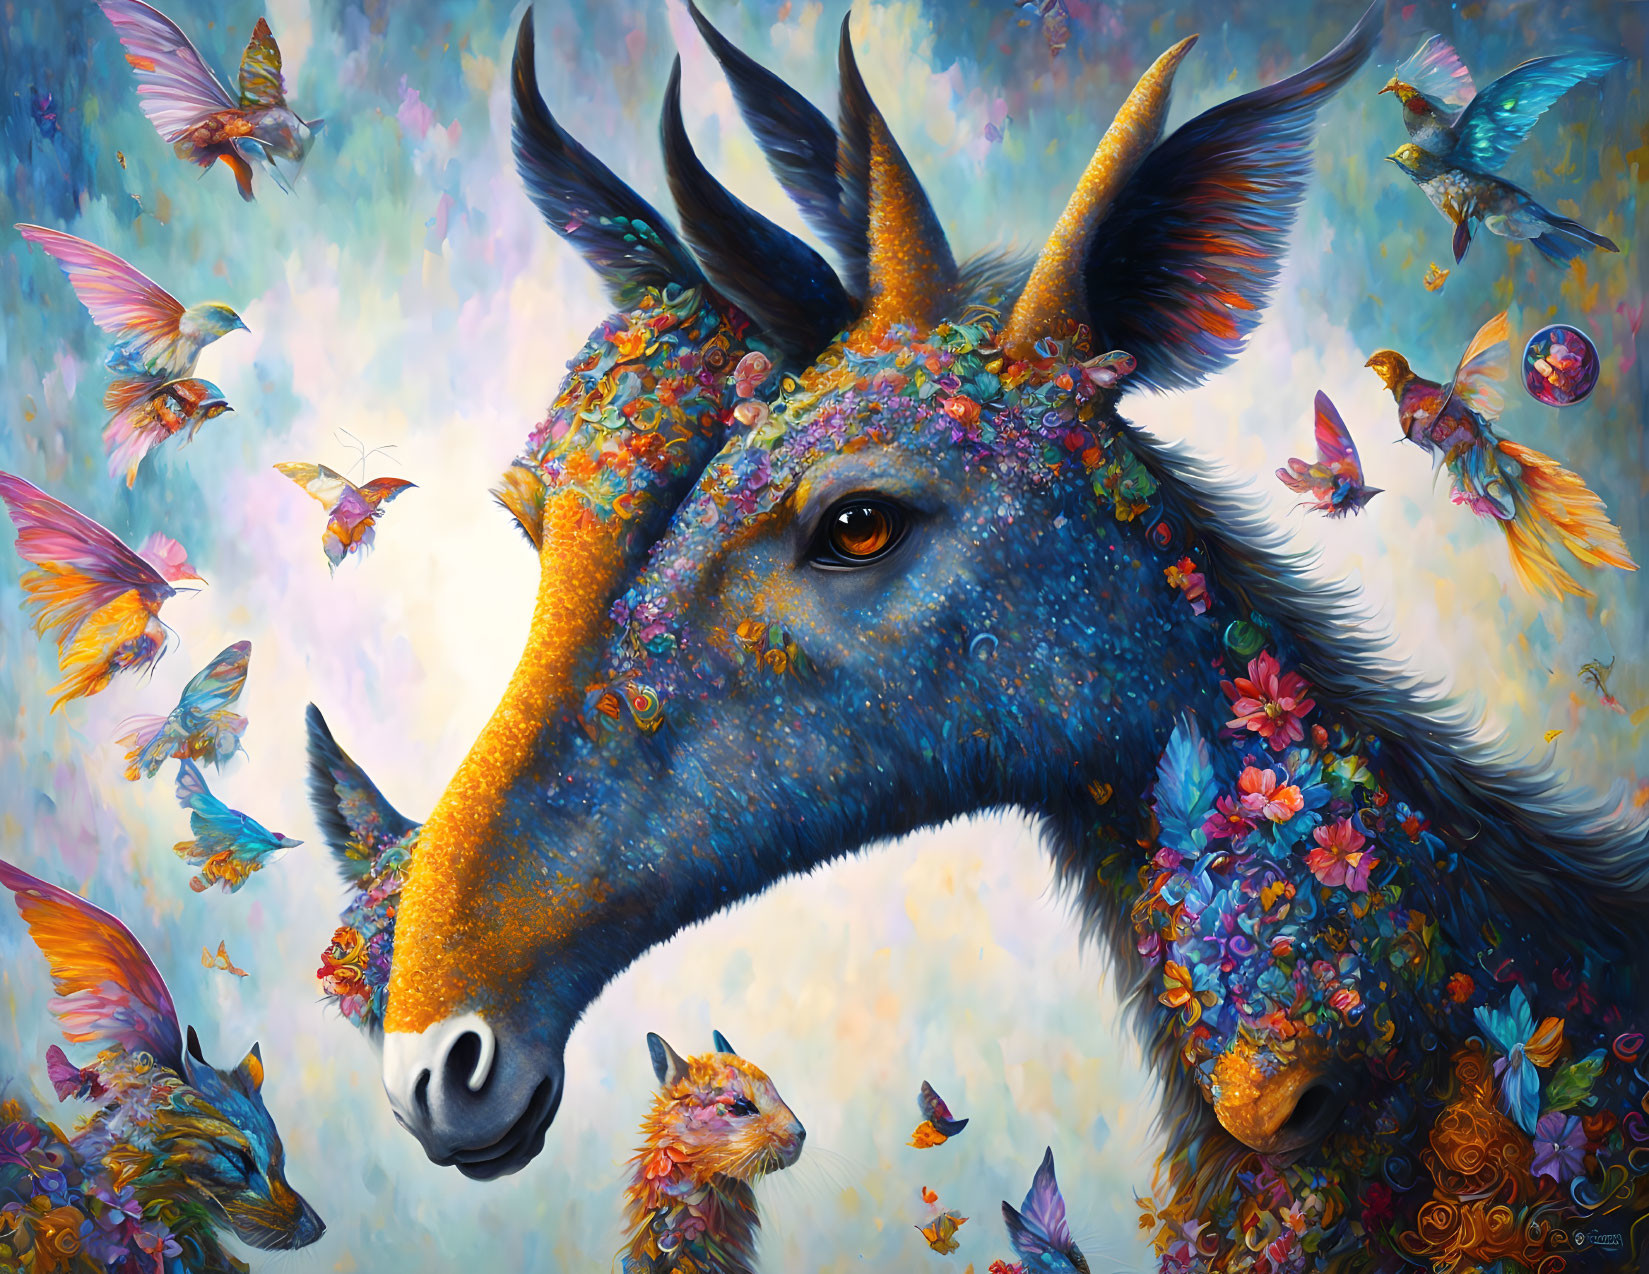 Colorful Unicorn Head Painting with Floral Mane and Birds in Whimsical Setting